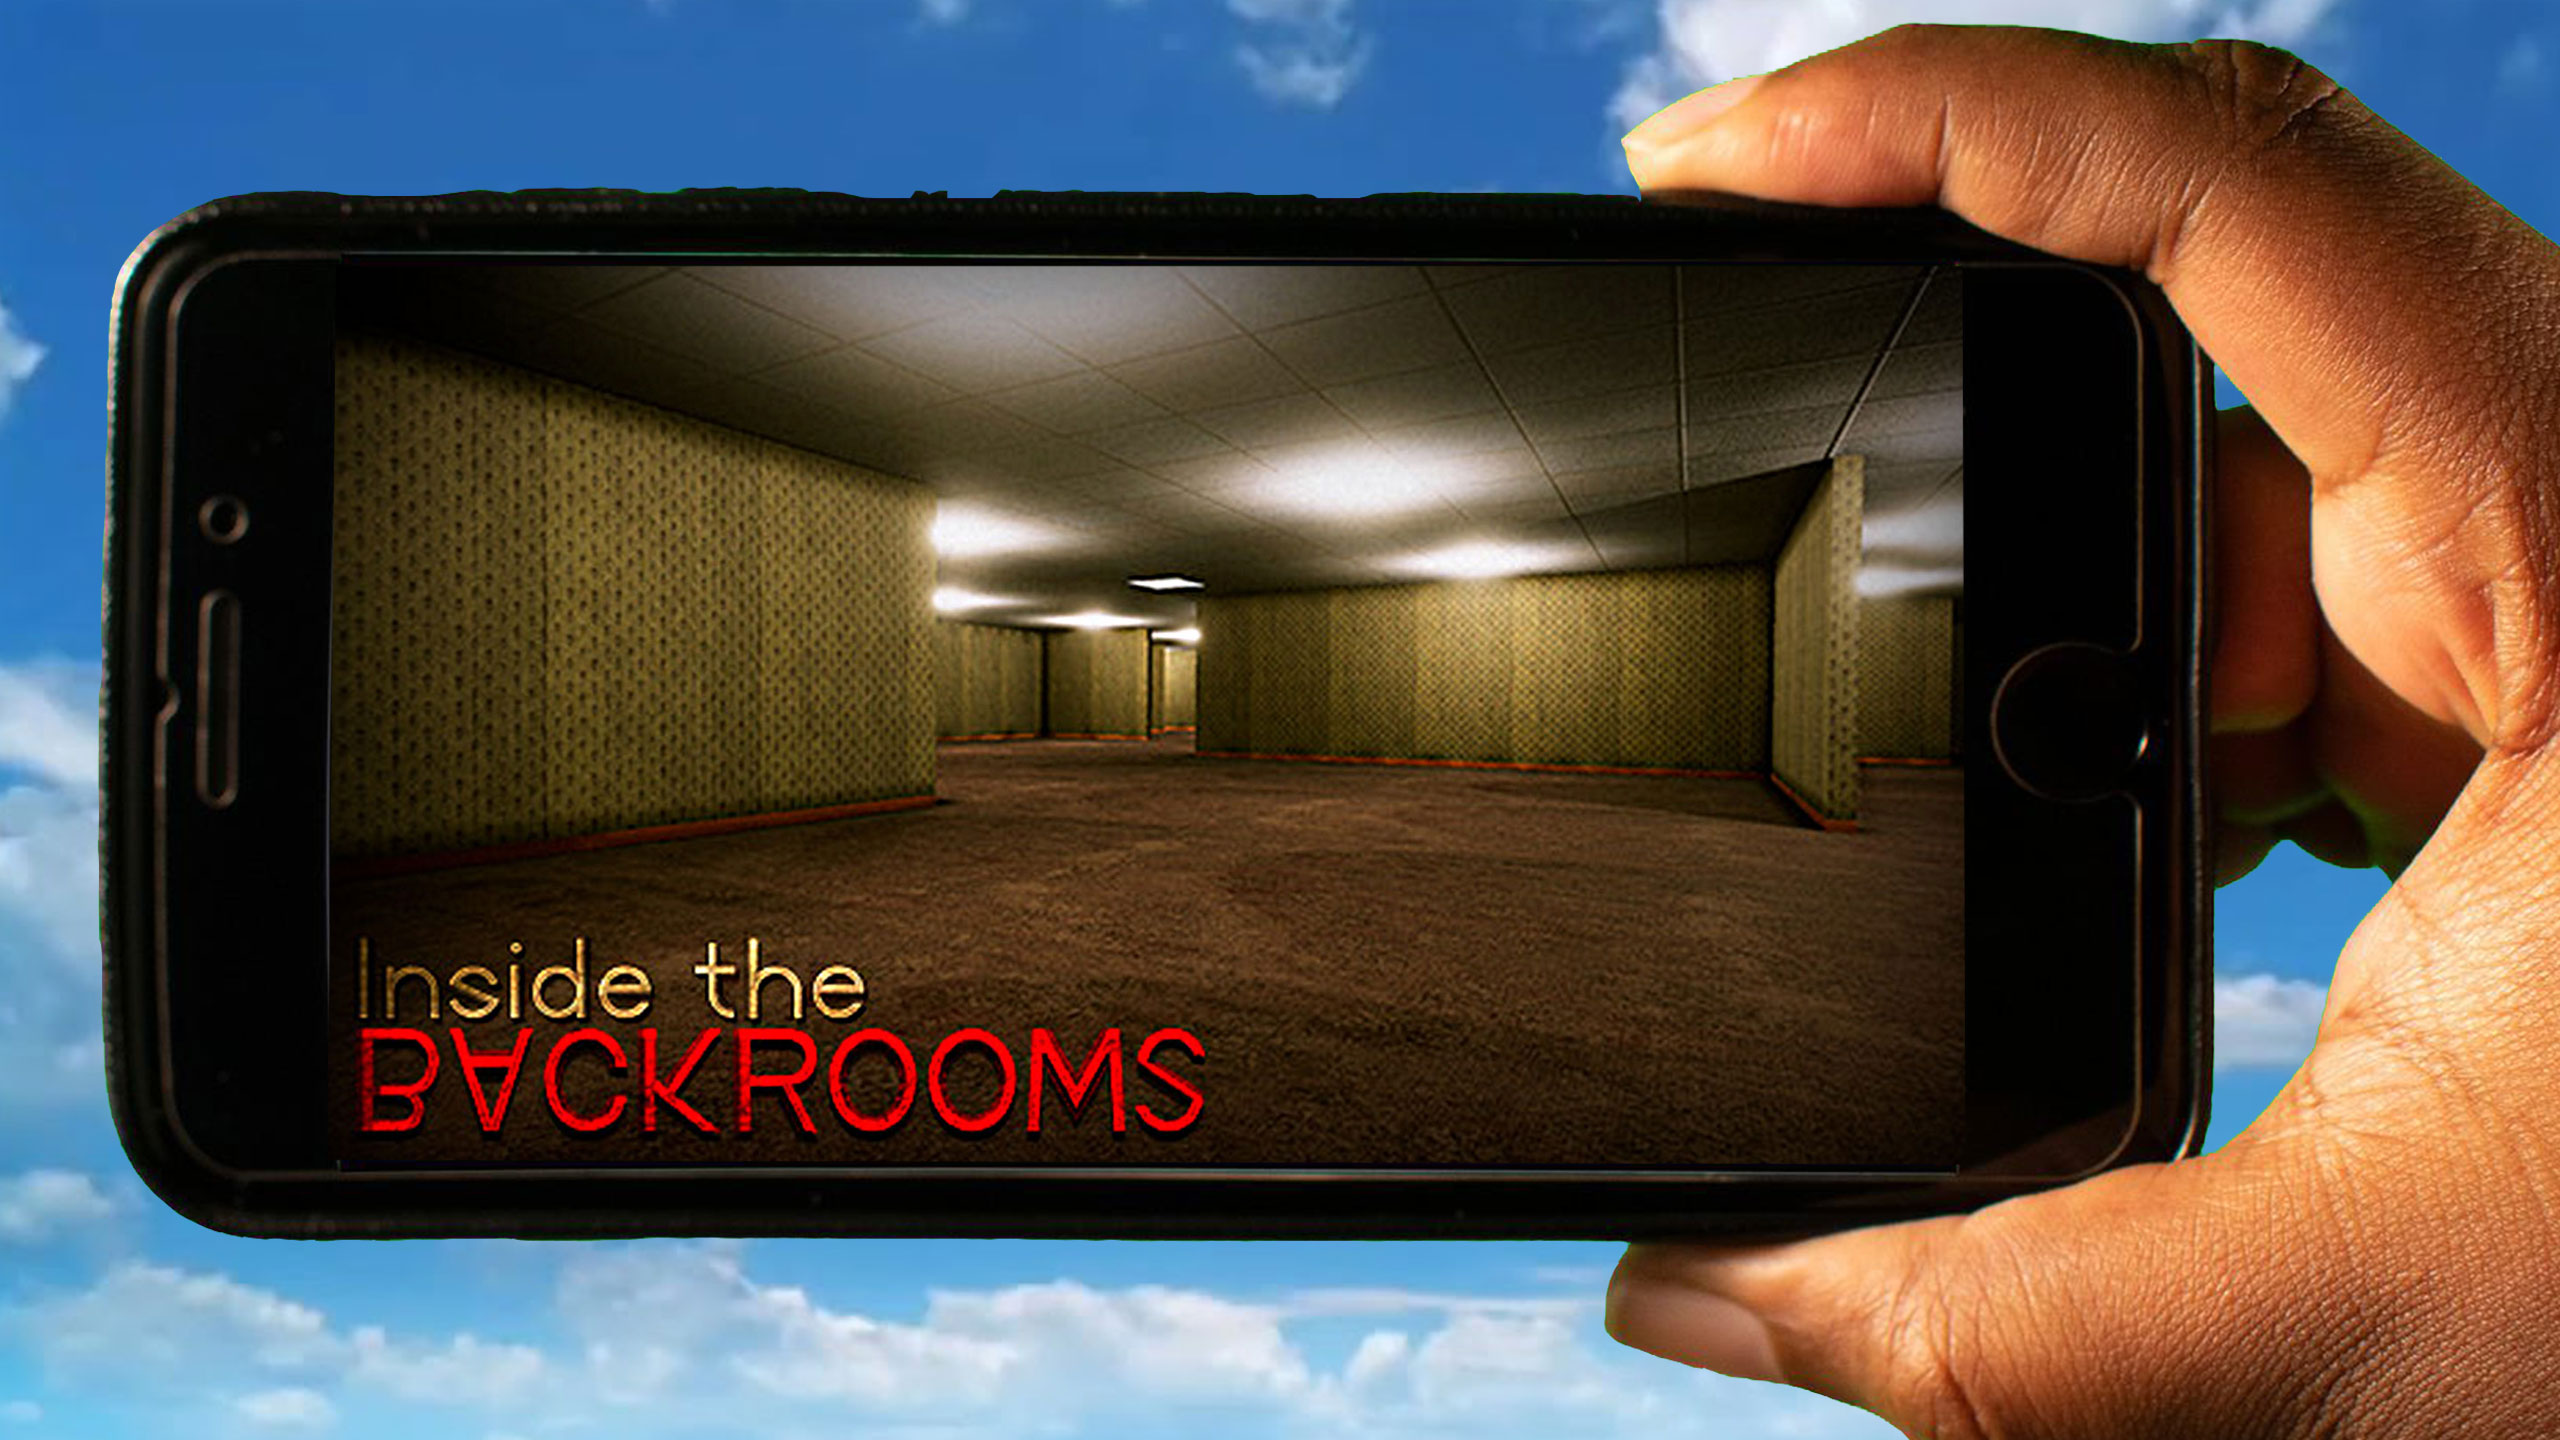 inside-the-backrooms-mobile-how-to-play-on-an-android-or-ios-phone